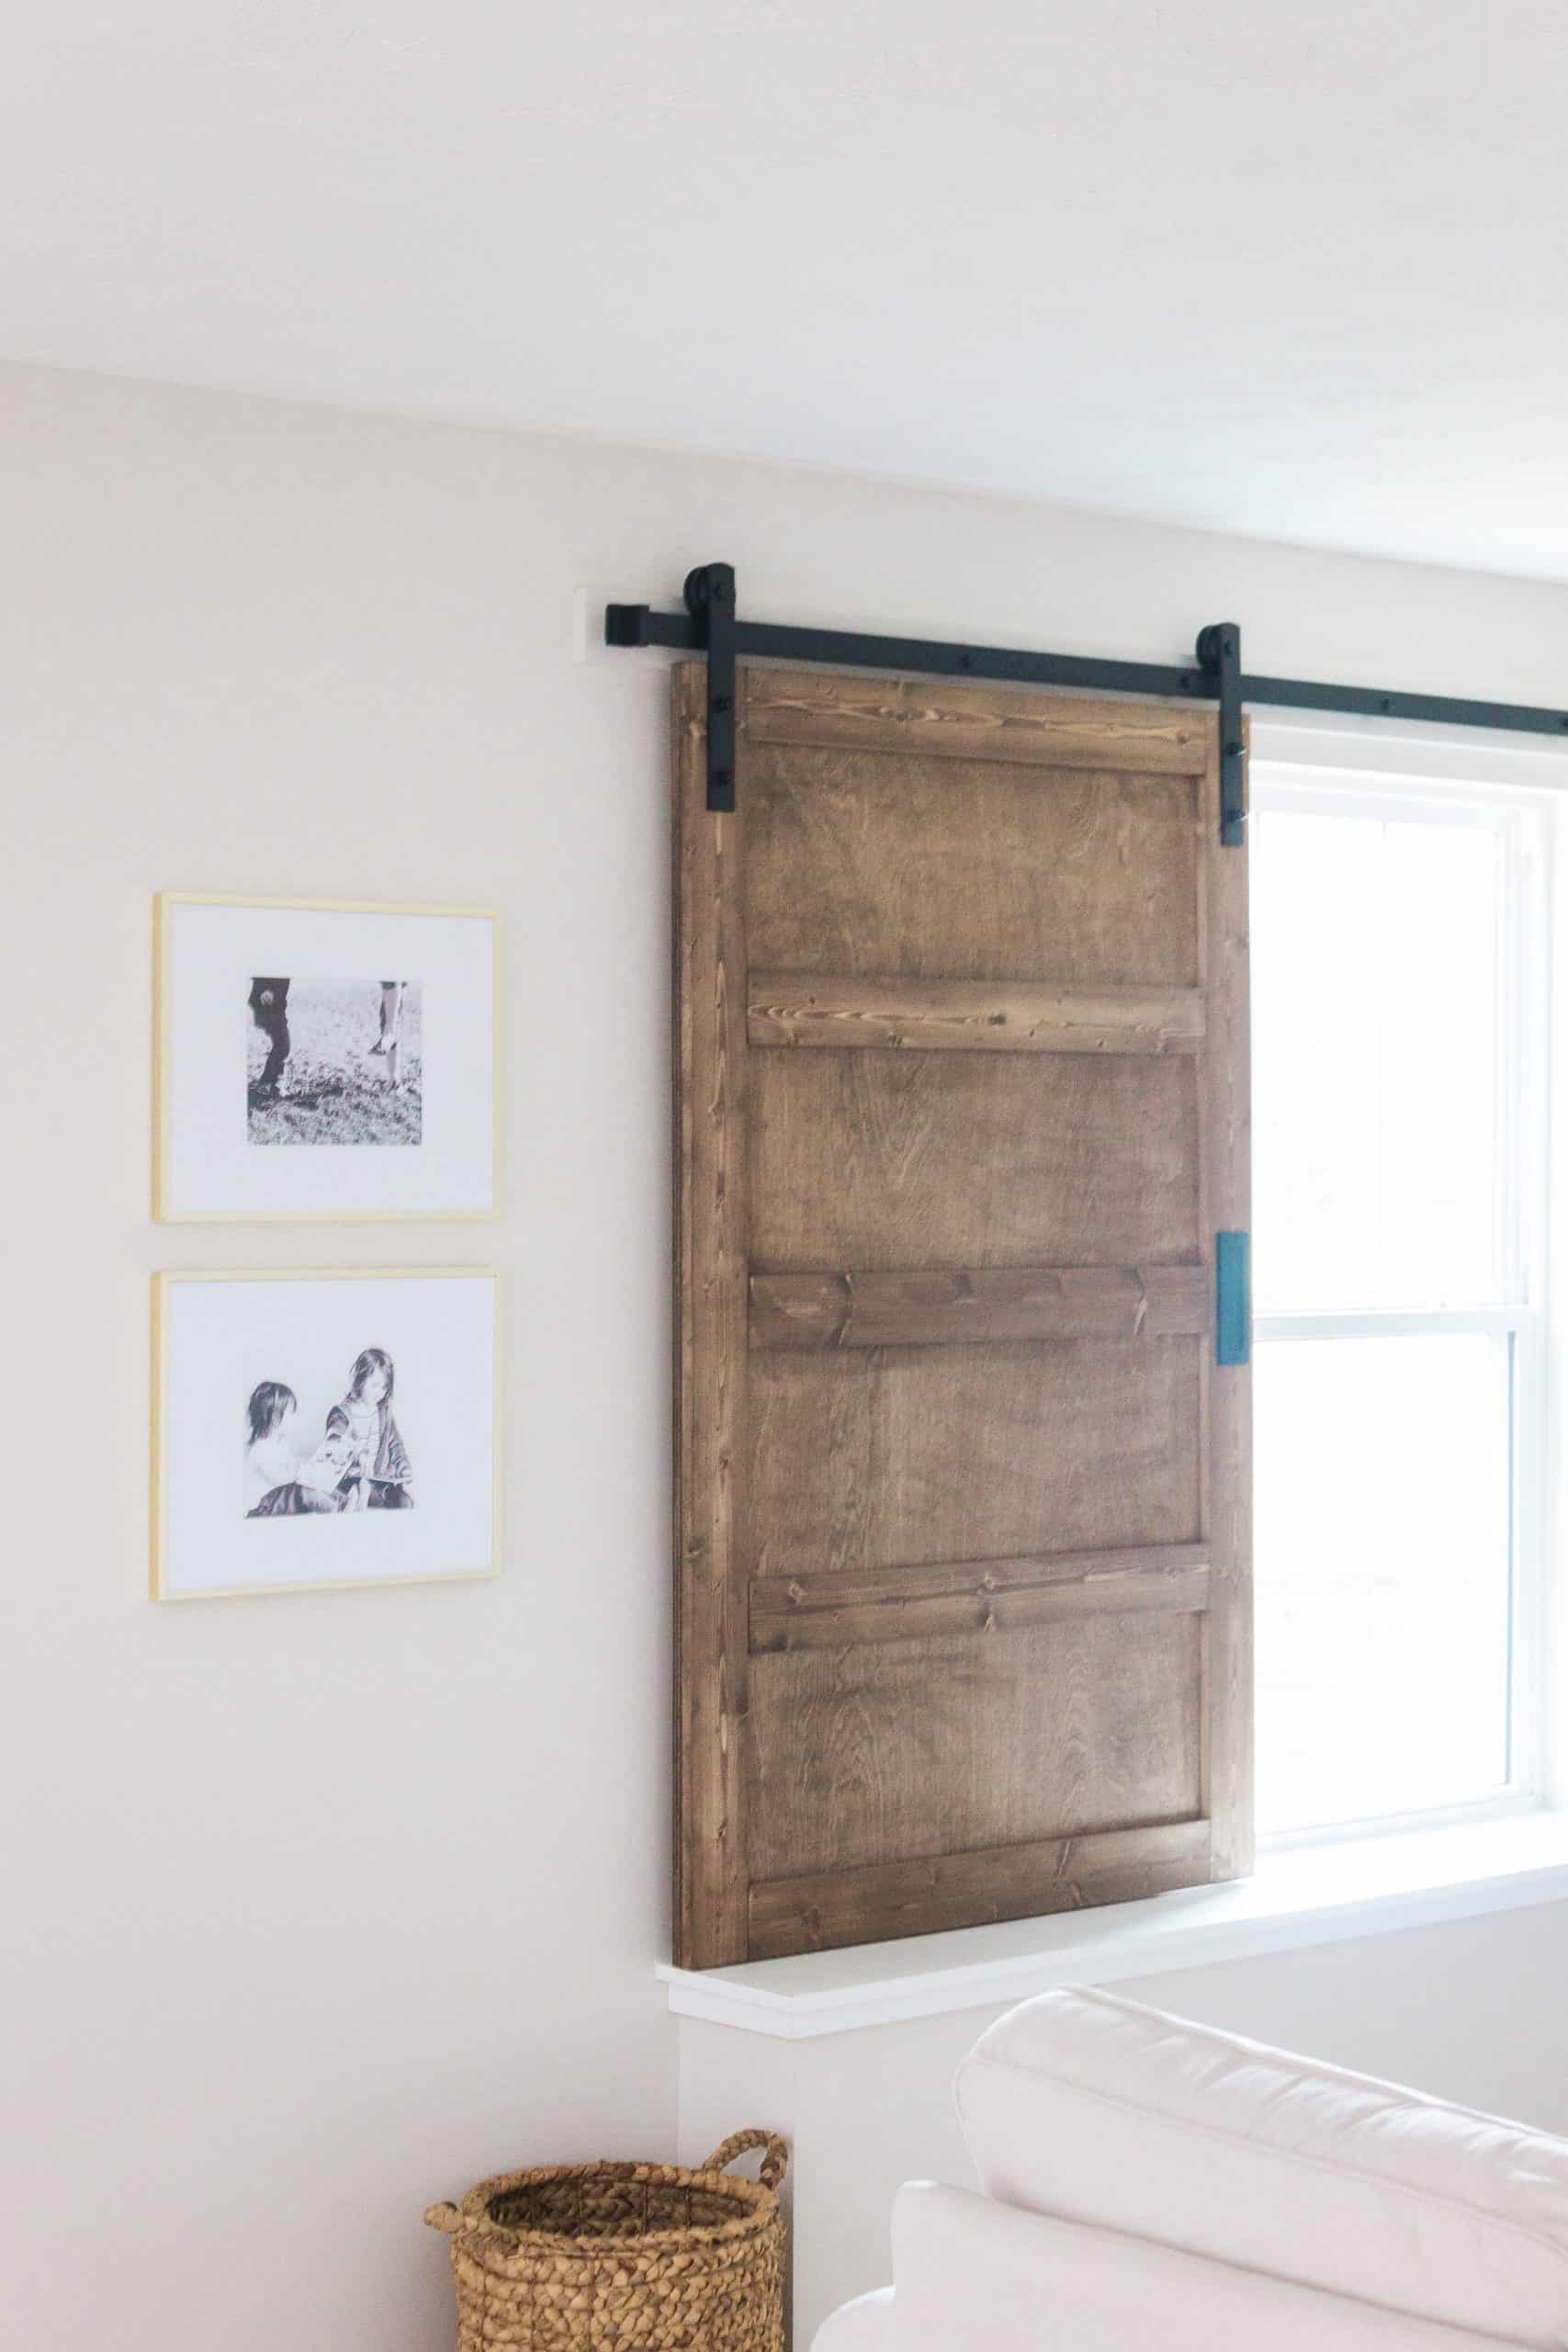 Want to build a modern farmhouse-inspired sliding barn door window covering? Head to www.freeandunfettered.com for the complete tutorial. #diyhome #modernfarmhouse #slidingbarndoor #diyhomedecor 